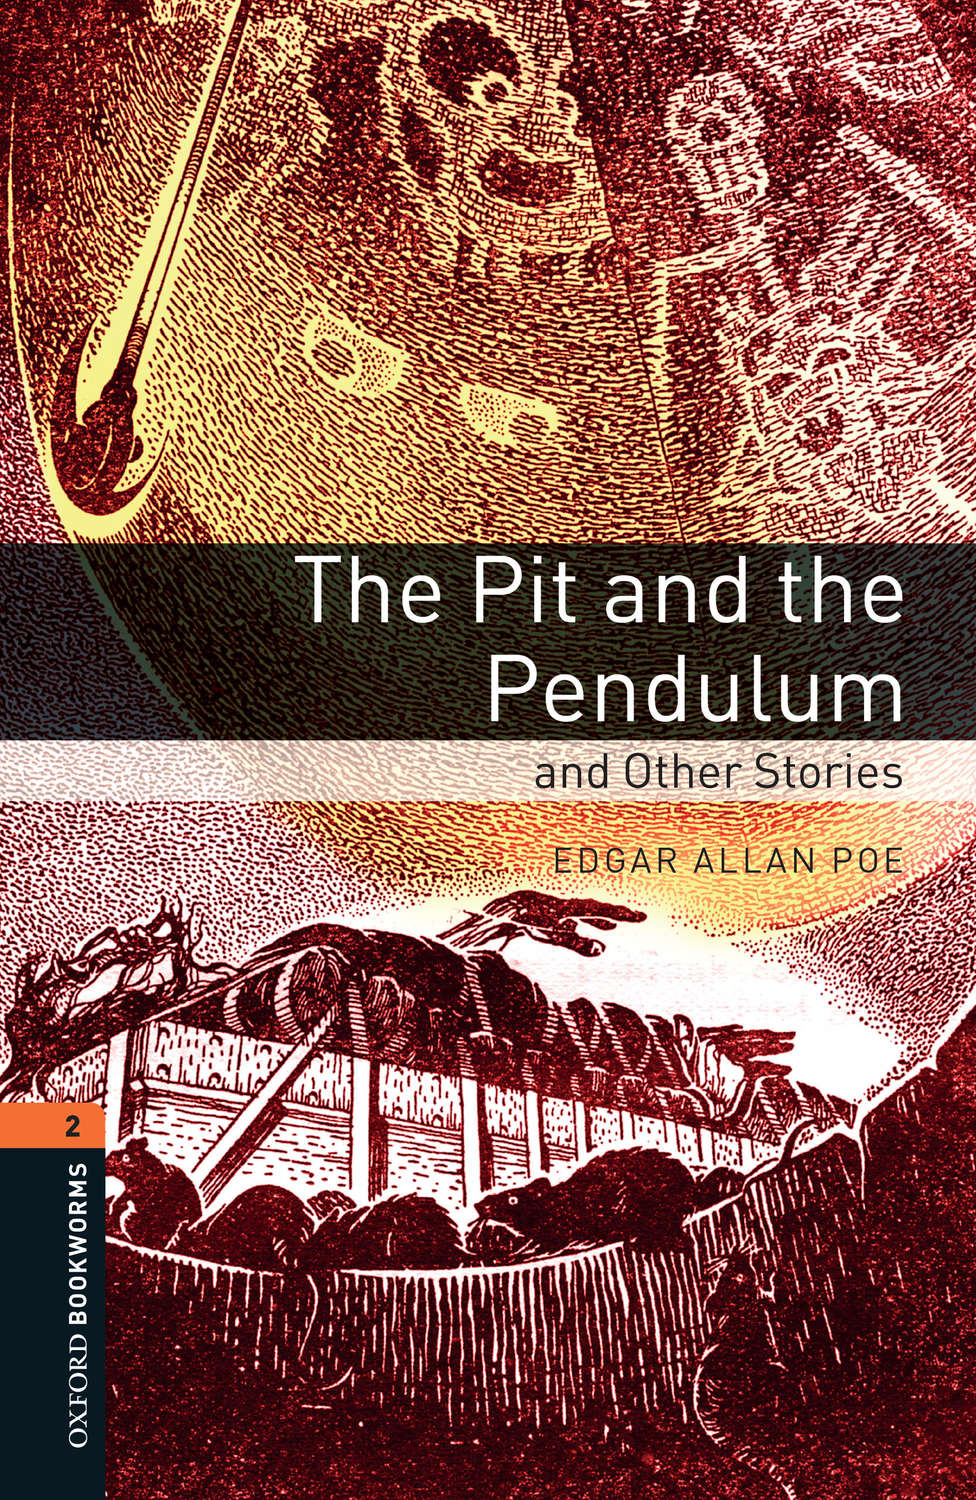 literary analysis essay of the pit and the pendulum